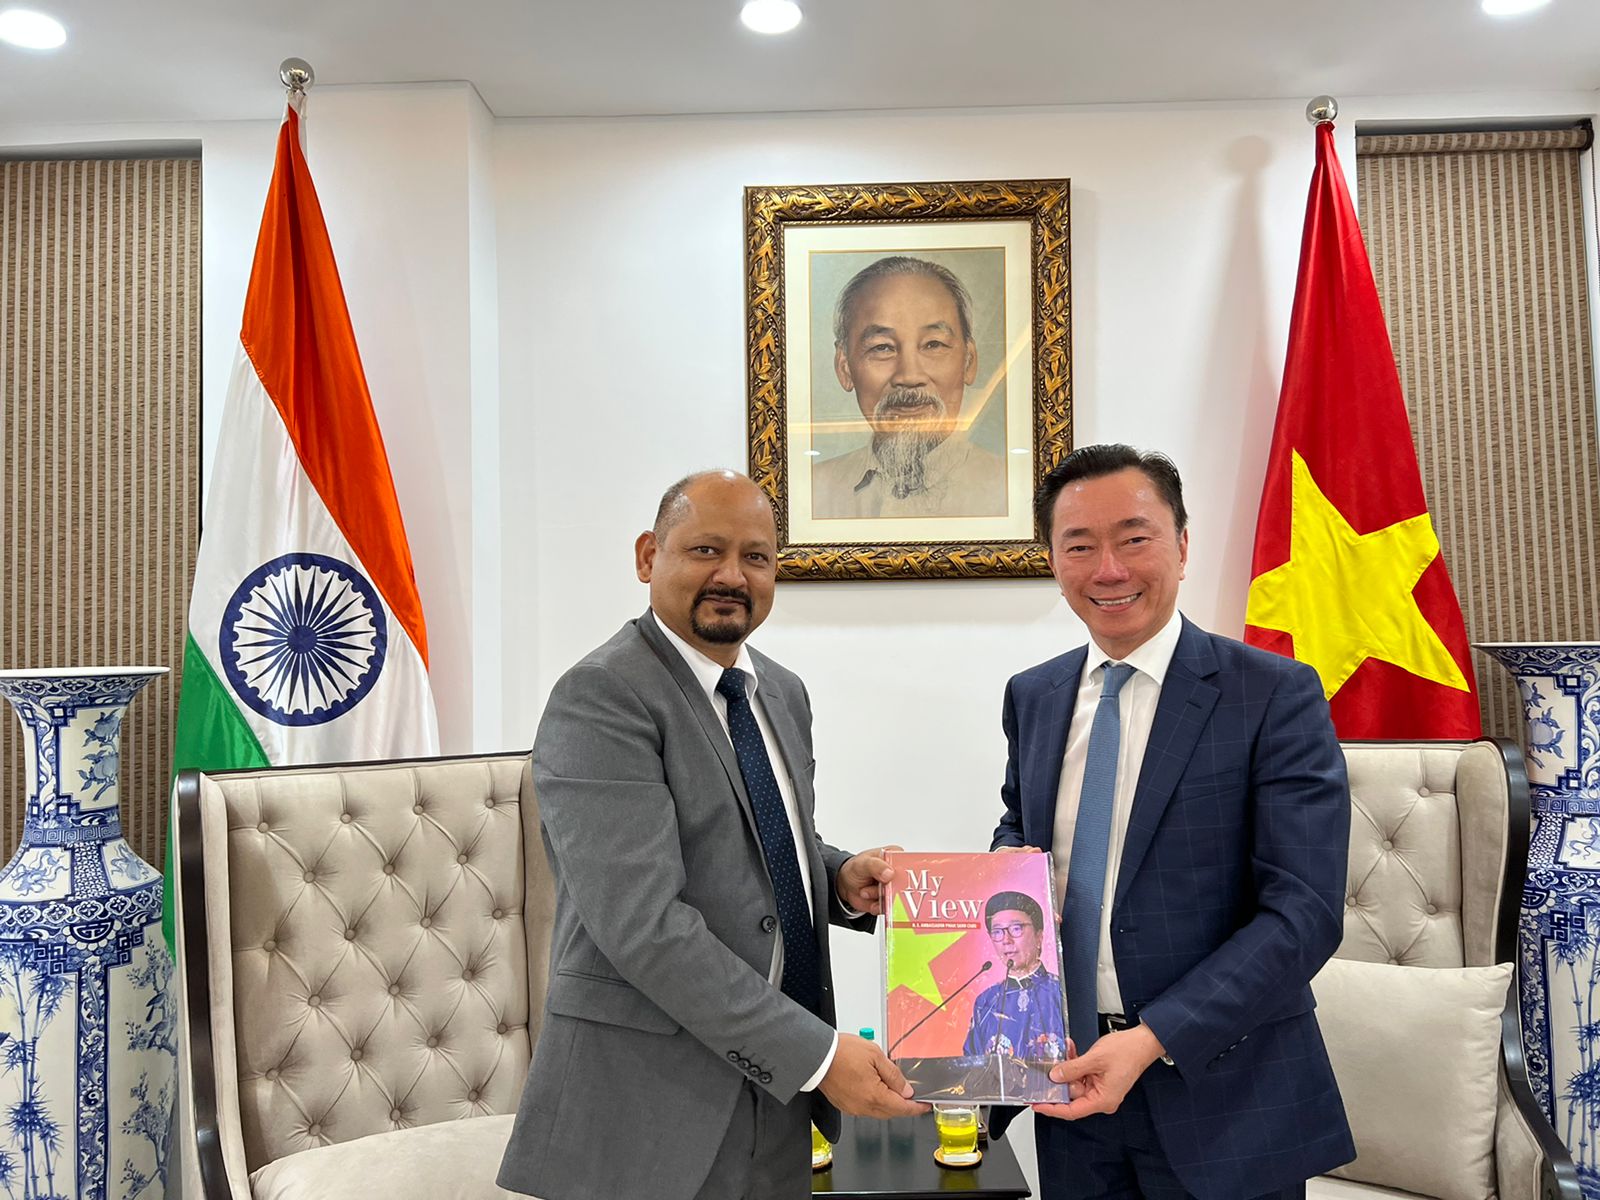 Our Chairman visited Vietnam’s Ambassador to India – Mr. Pham Sanh Chau in the new premises of Vietnam Embassy in India.